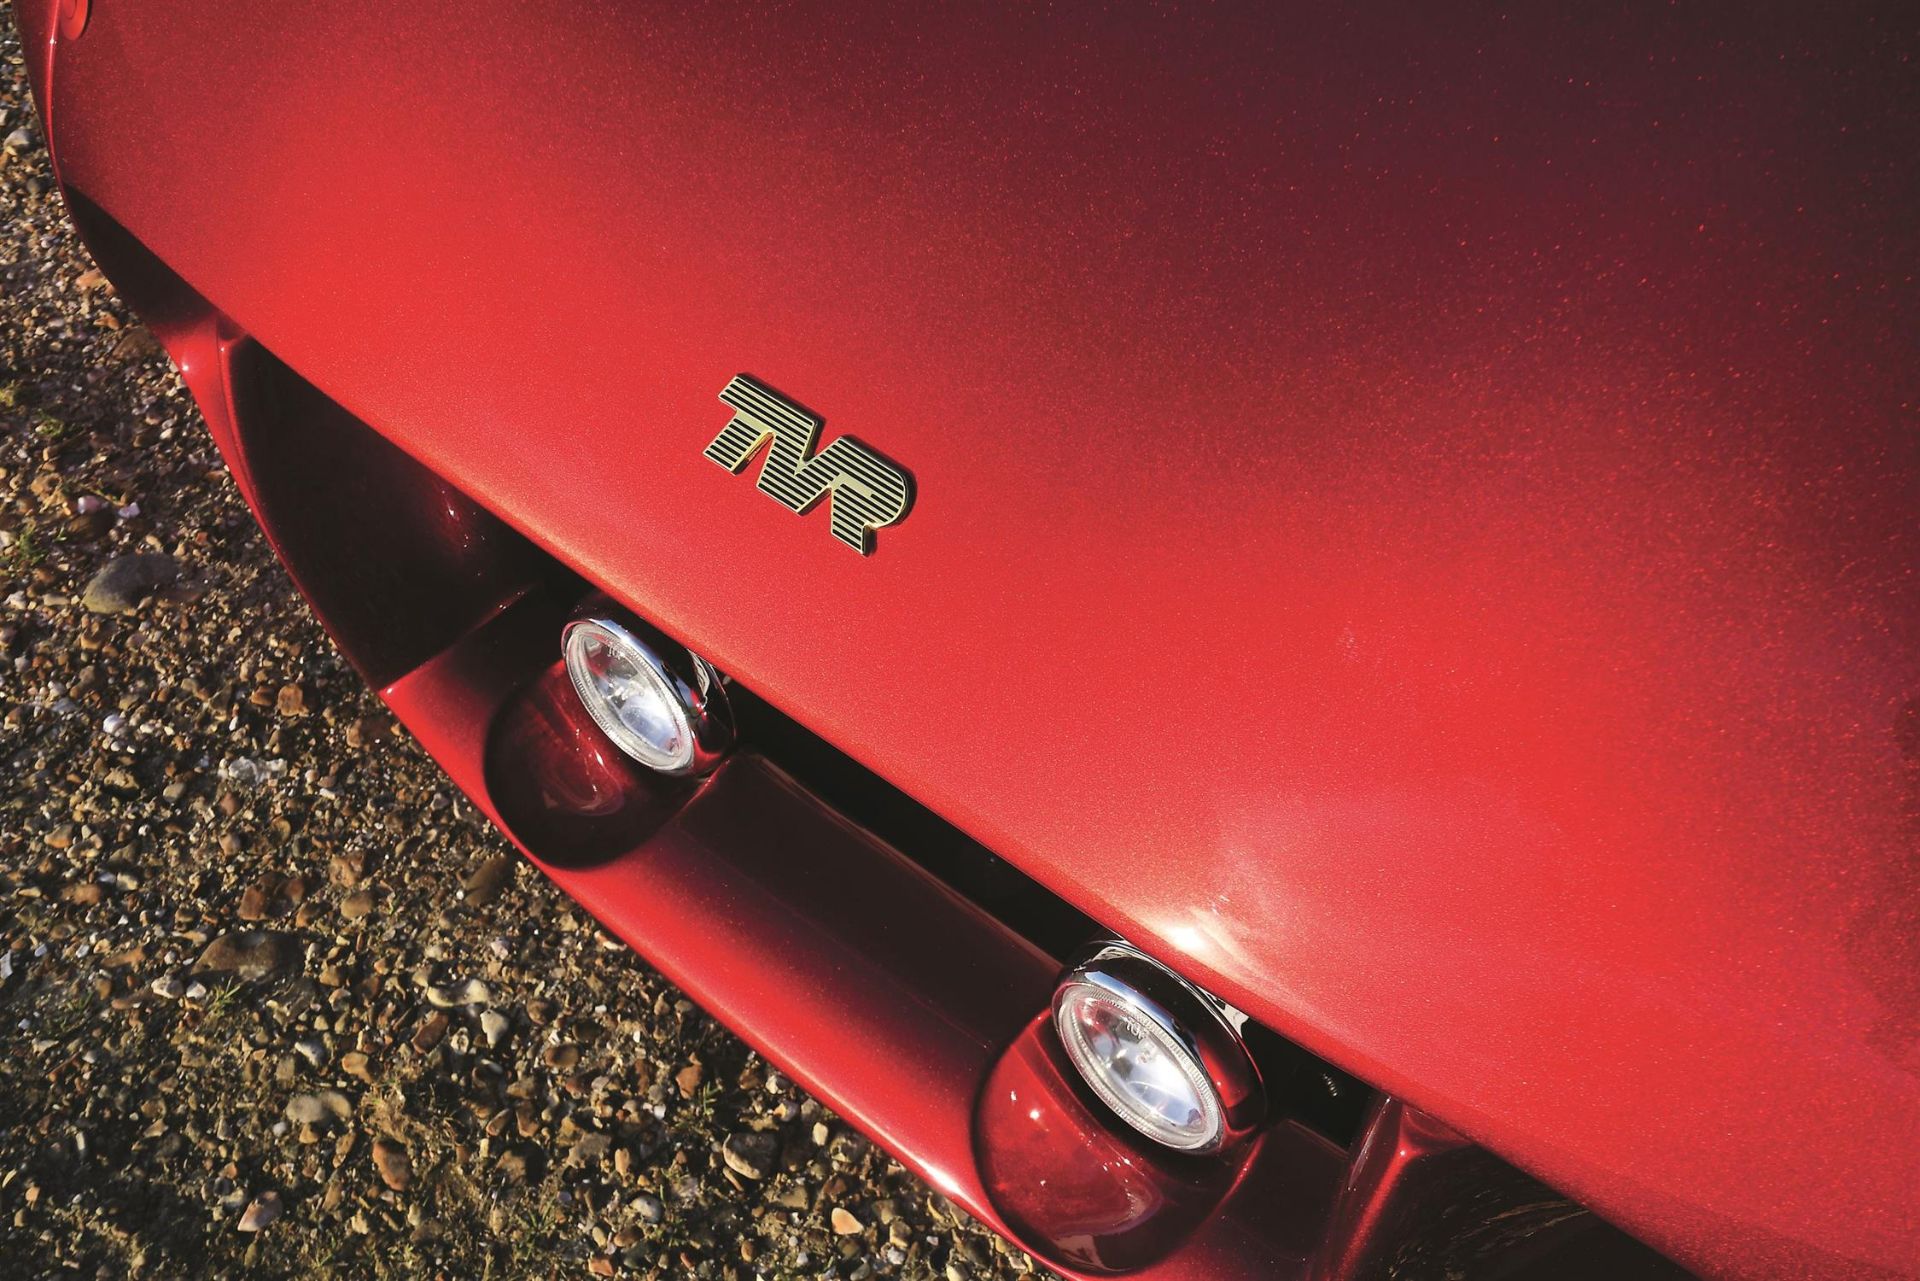 2002 TVR T440R - Image 7 of 10